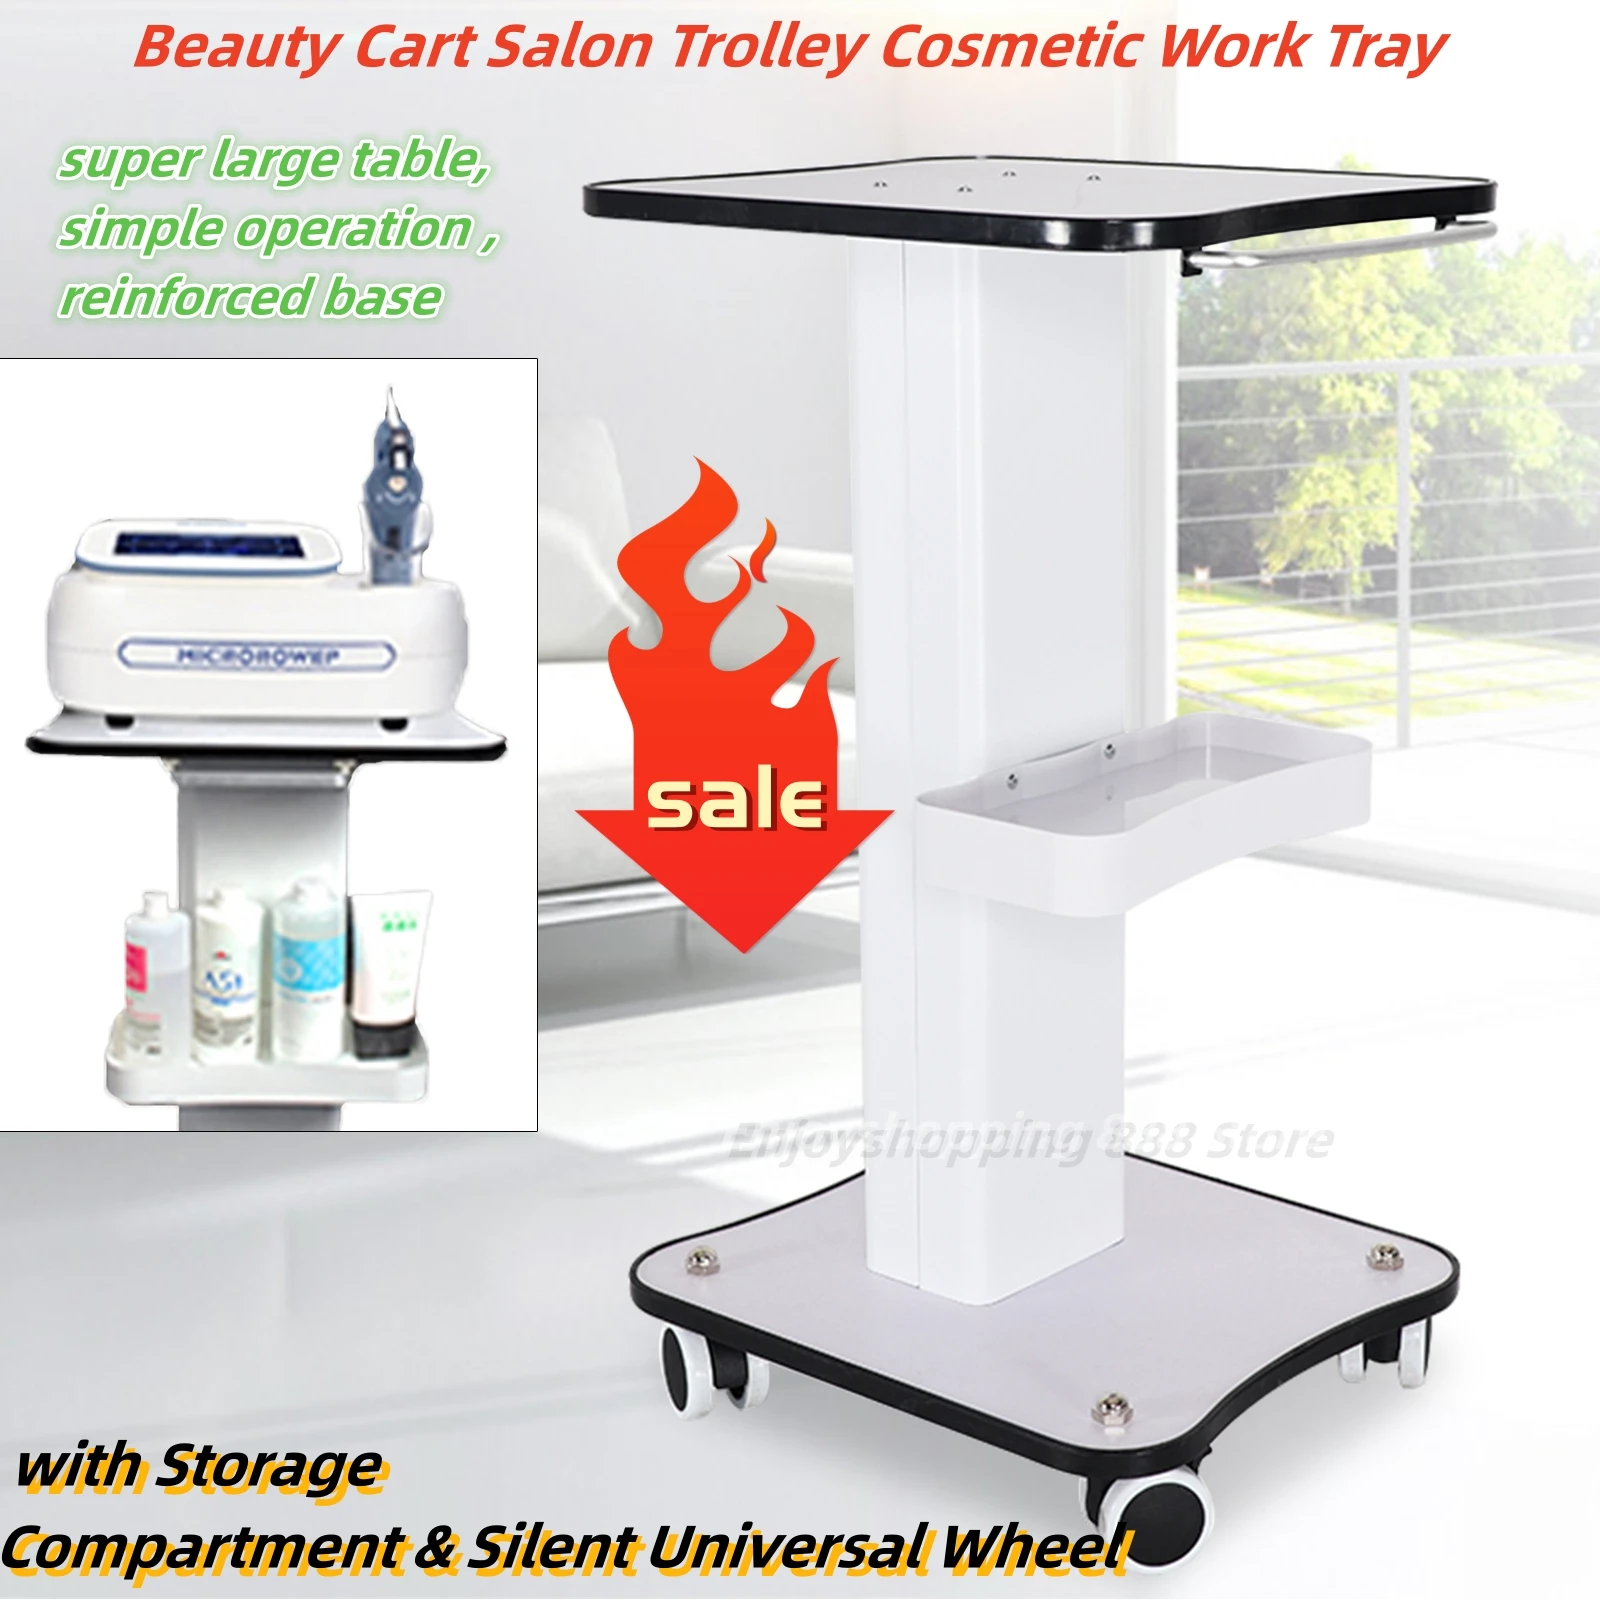 Beauty Cart Salon Trolley Cosmetic Work Tray with Storage Compartment & Silent Universal Wheel 1 pc 5 inch single wheel caster tpr grey flat edge universal brake wear resistant driver cart